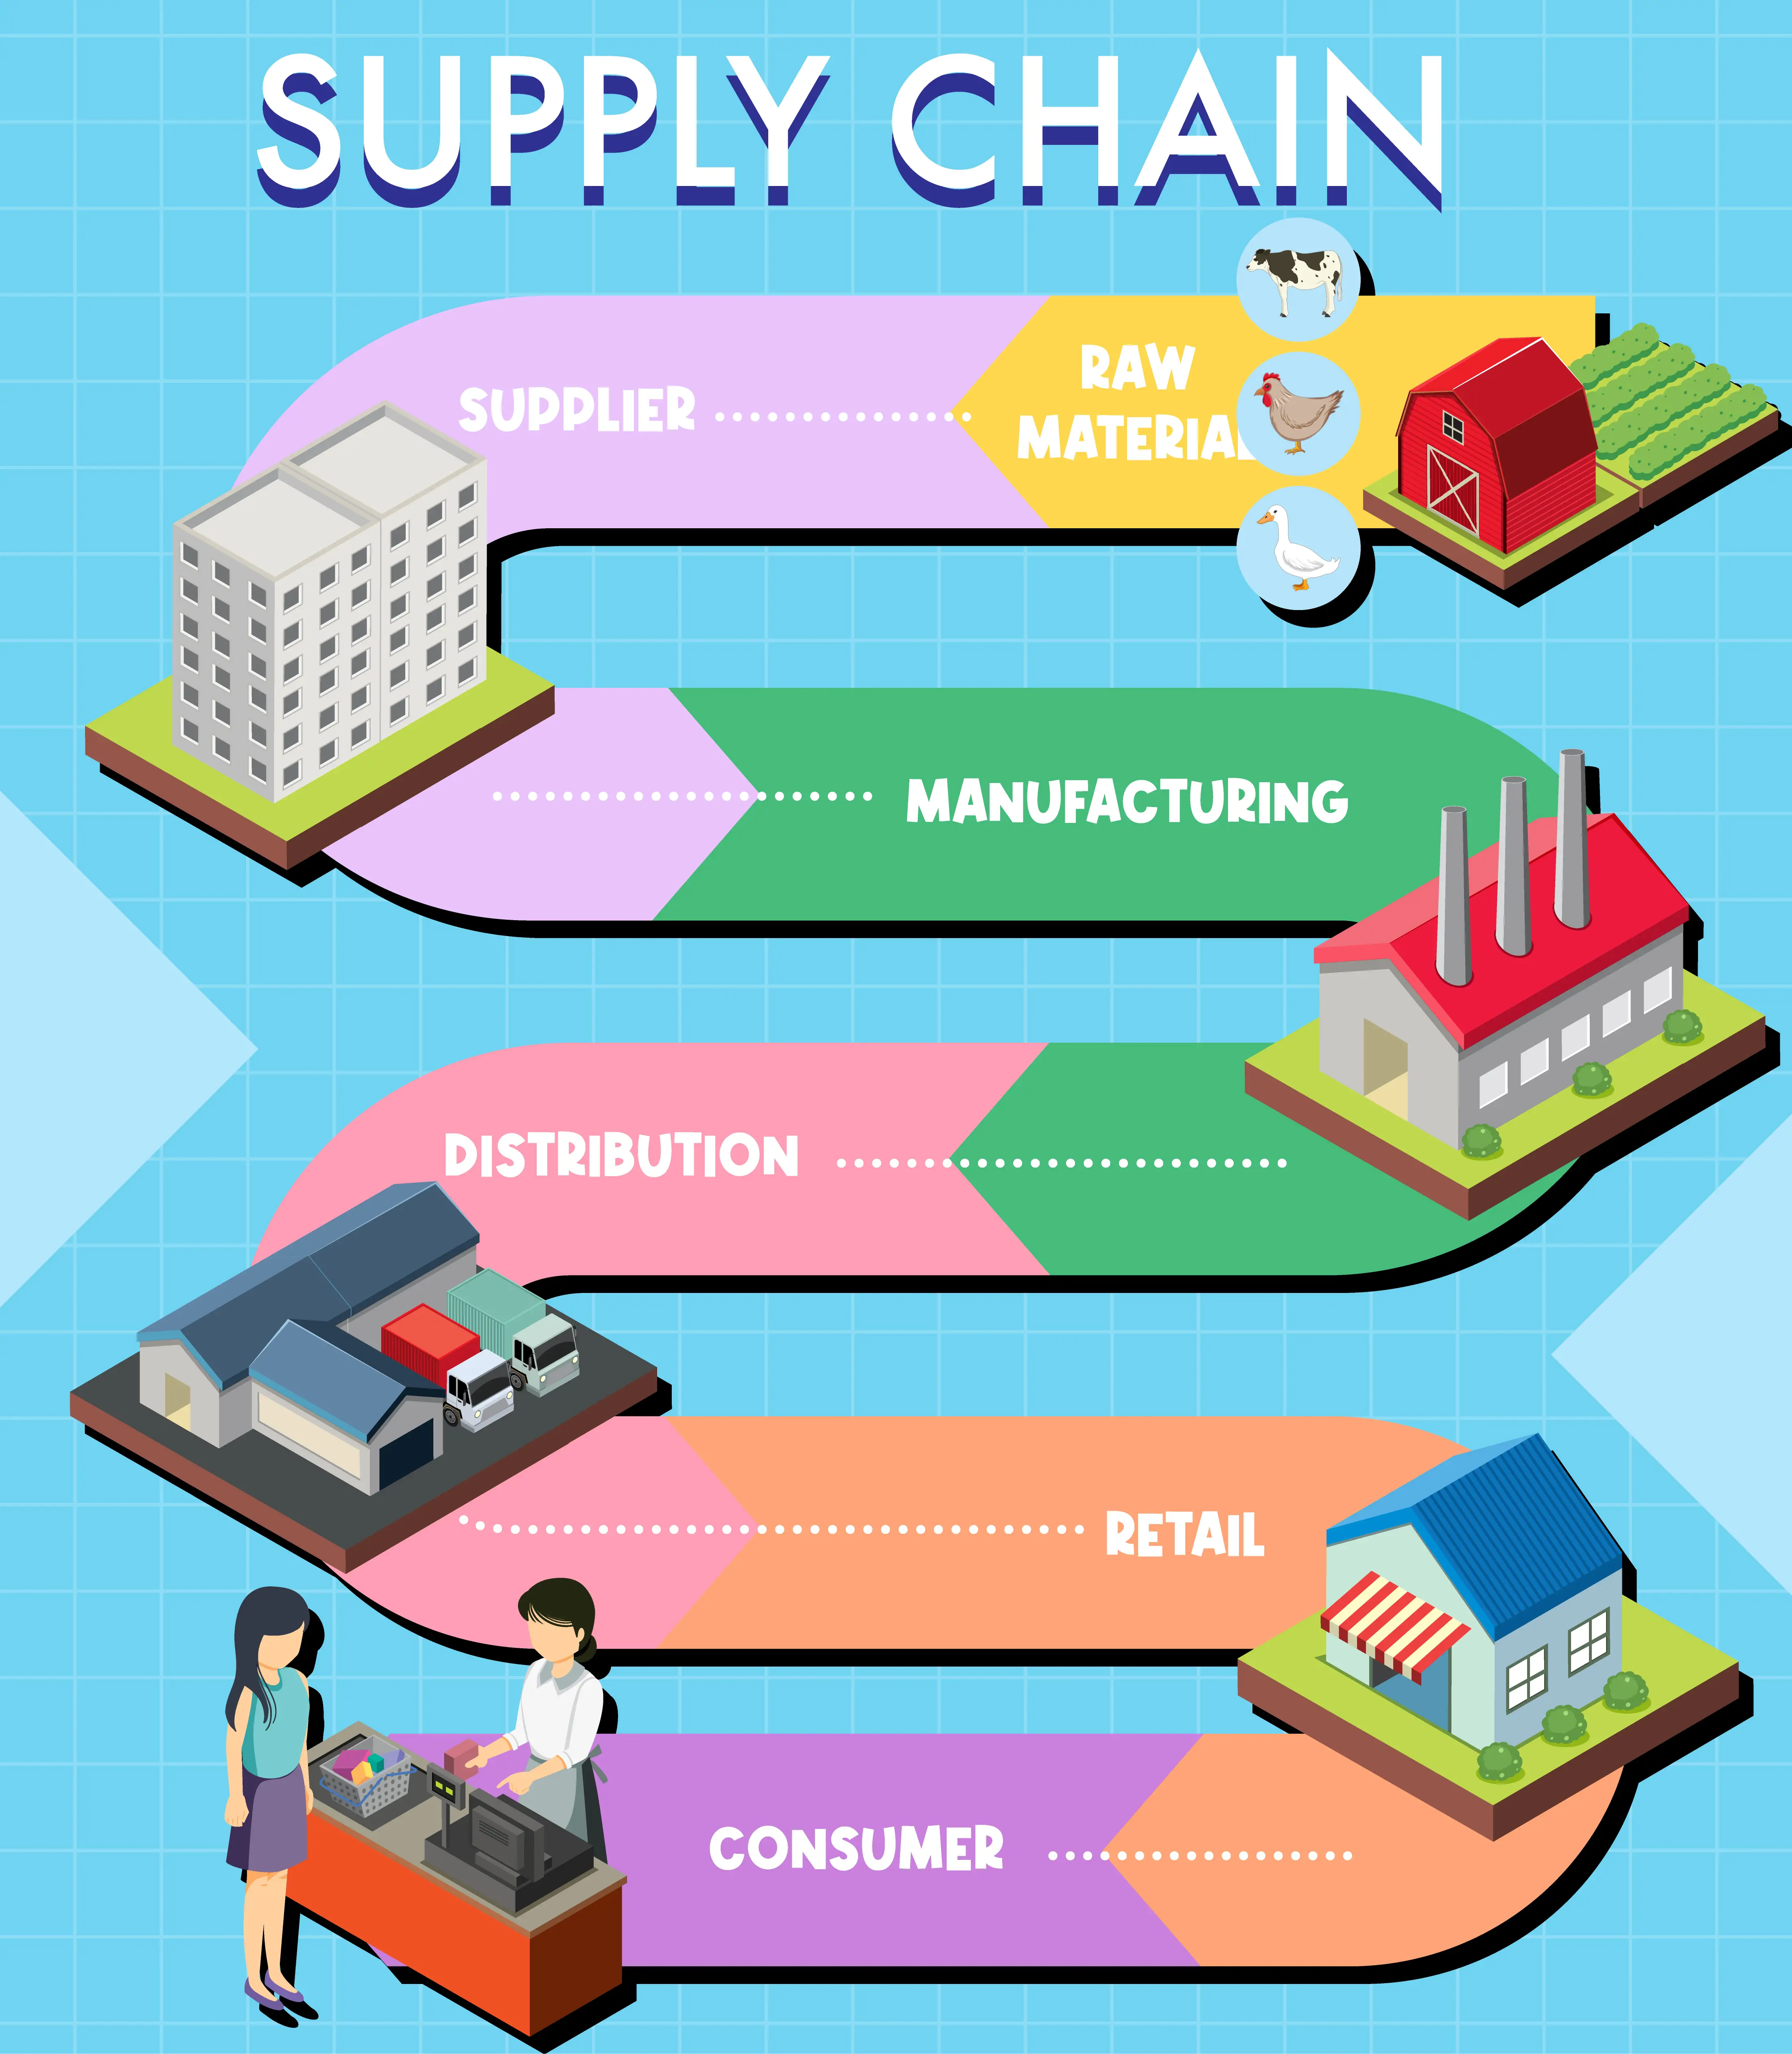 Creating a Sustainable & Valuable Supply Chain